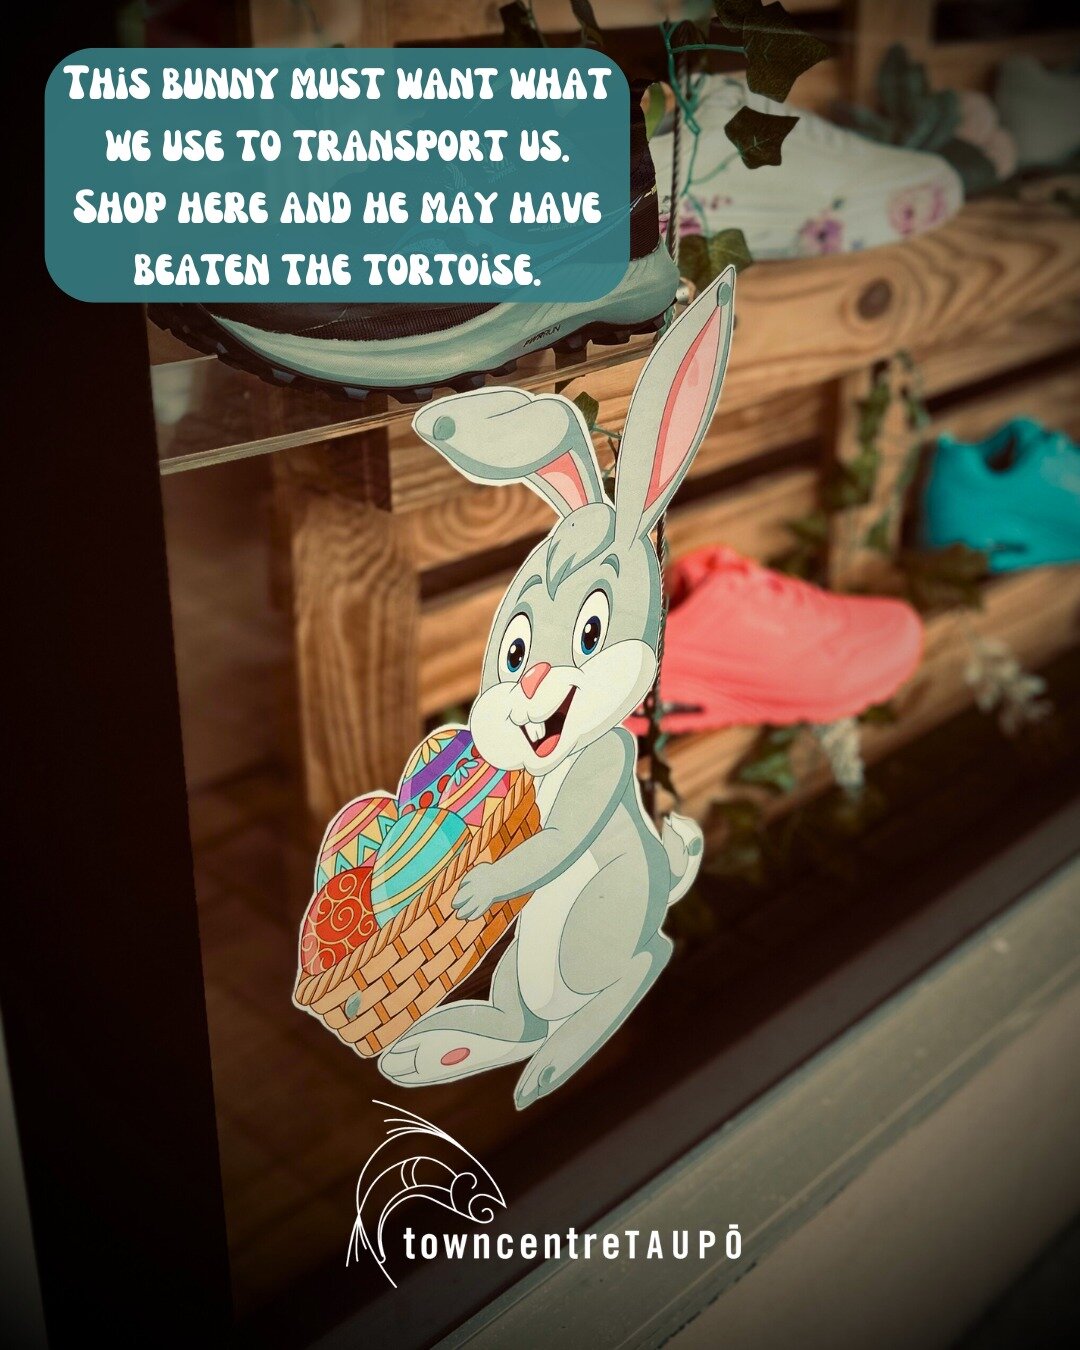 Bunnies, bunnies all over town,
Can you find them all around?
Taupō Town Centre, you&rsquo;ll find their paw.
See at least 10 and be into the draw.

They may be high, they may be low, 
They may be&hellip;right under your nose!
This bunny must want wh